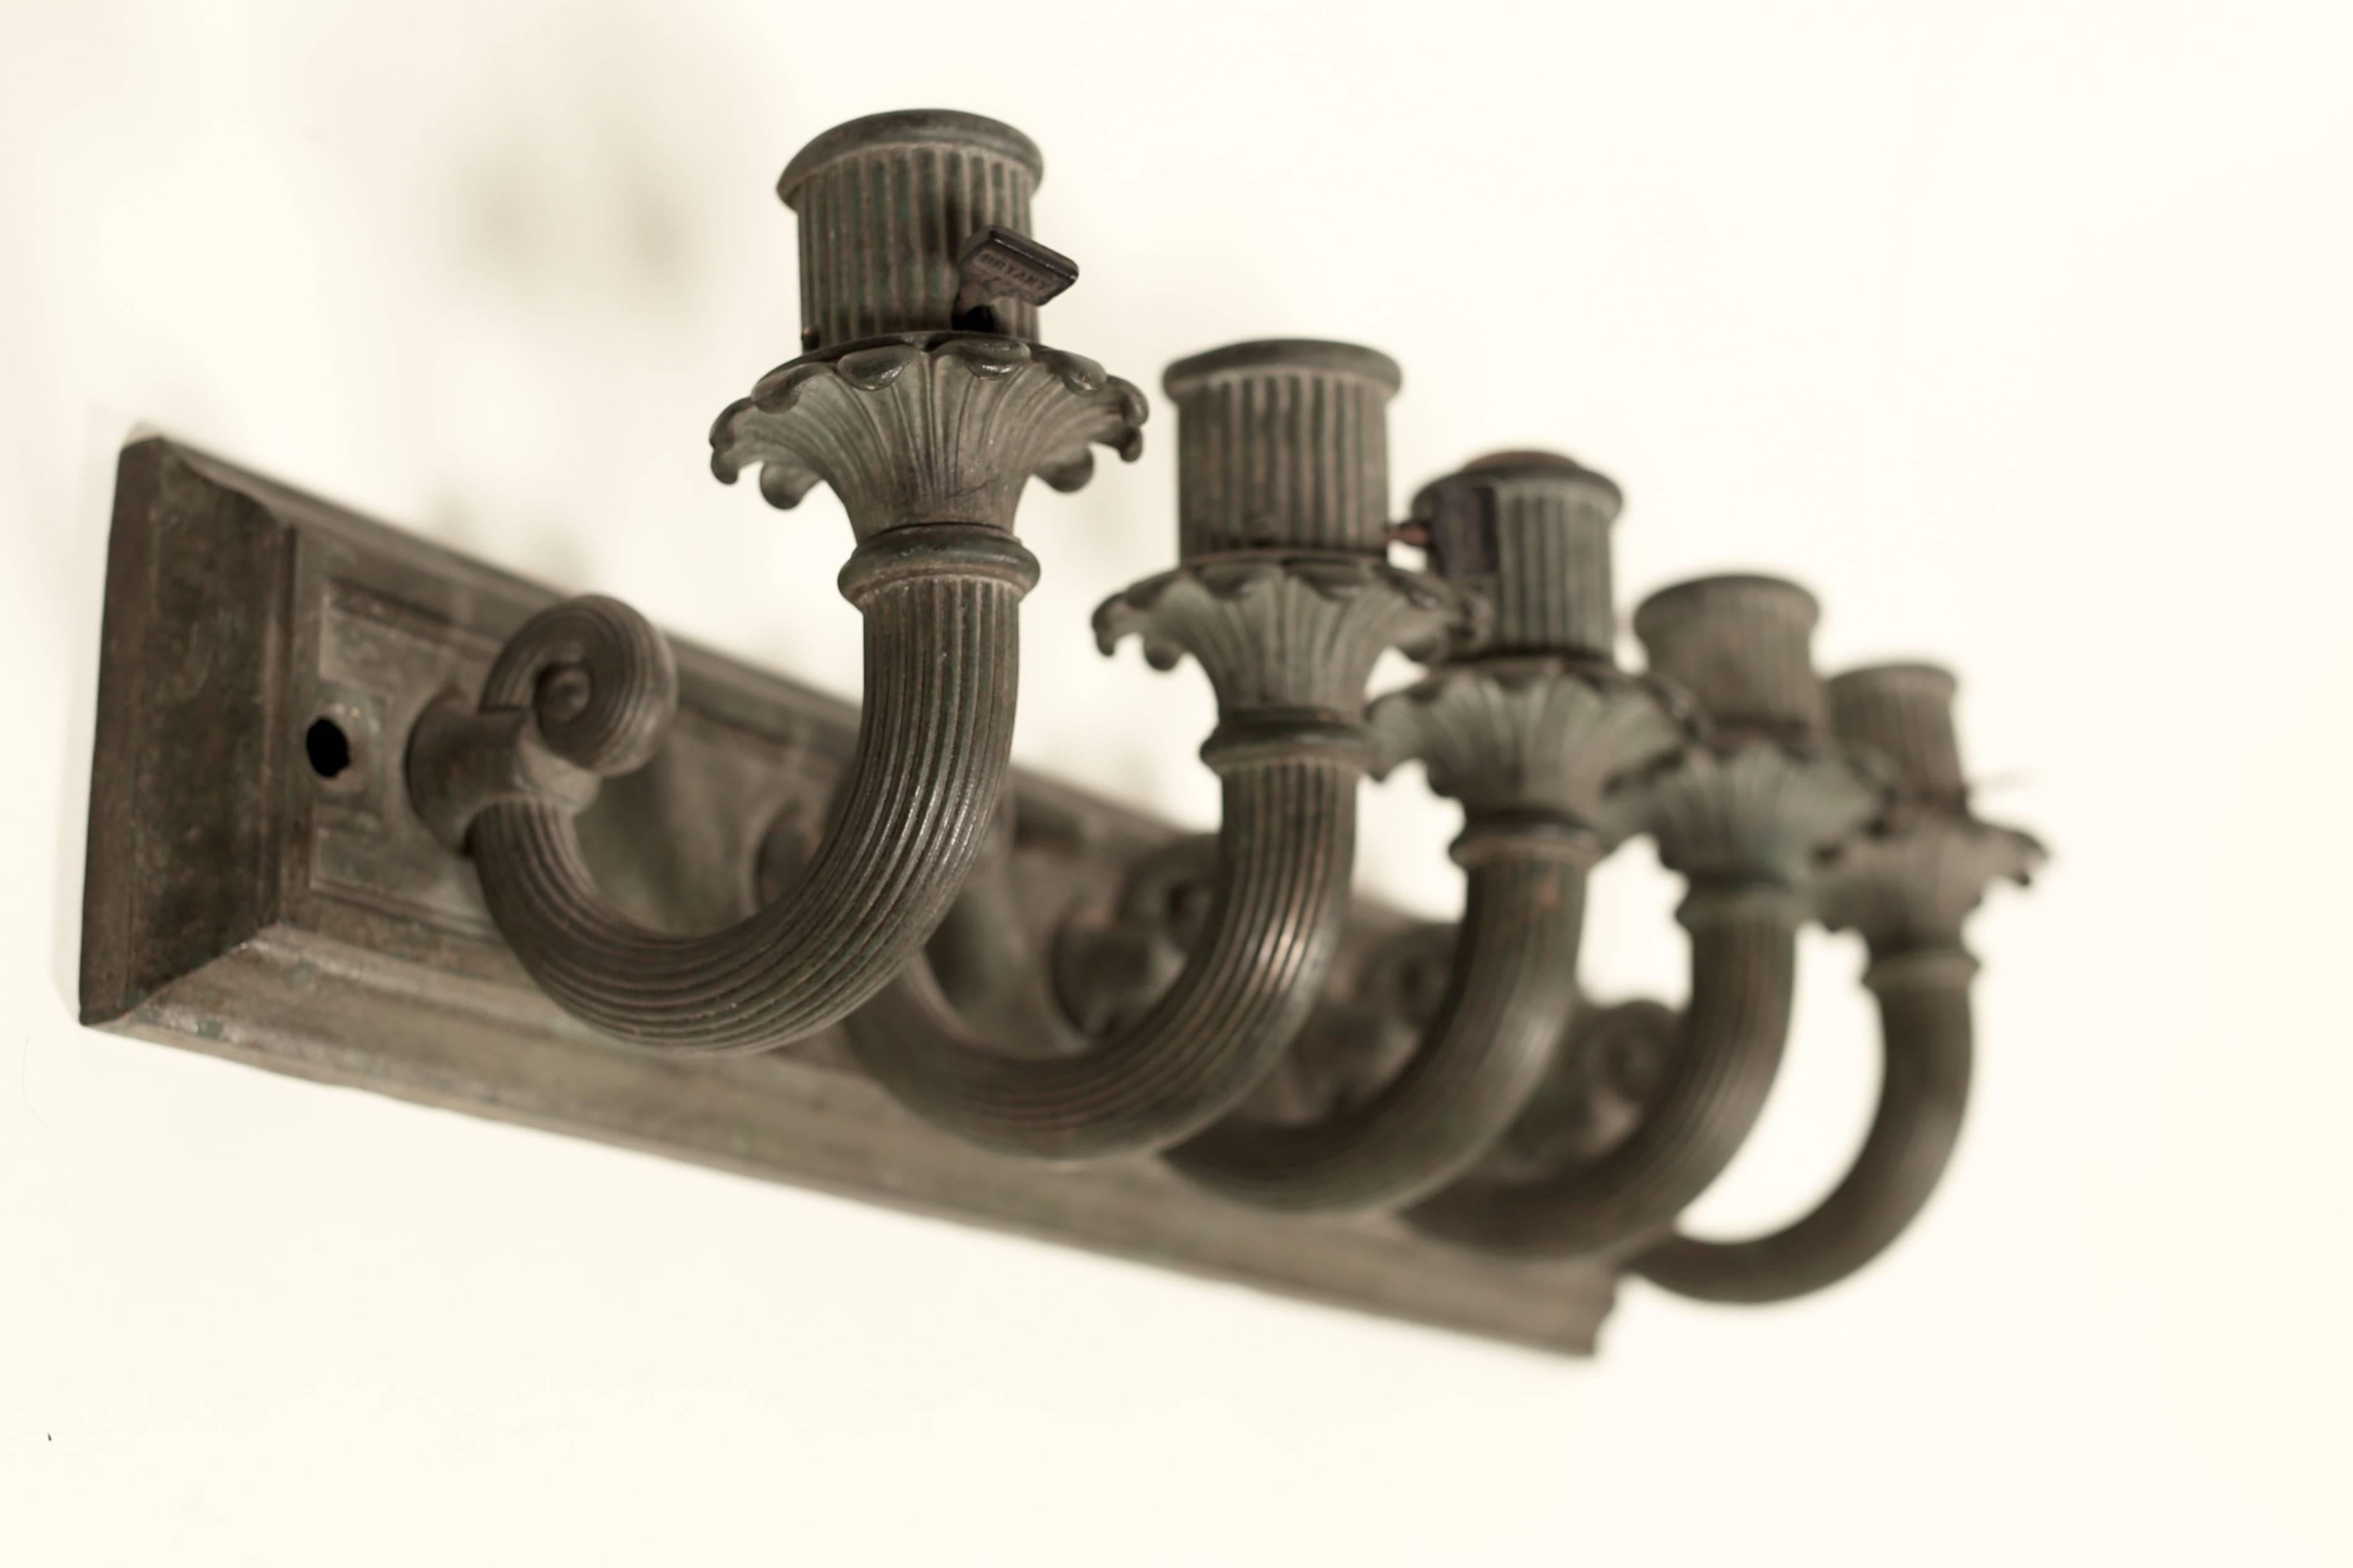 Pair of early American five-light candelabra sconces, circa 1910. Bronze; original patina. Wired for US standard bases.